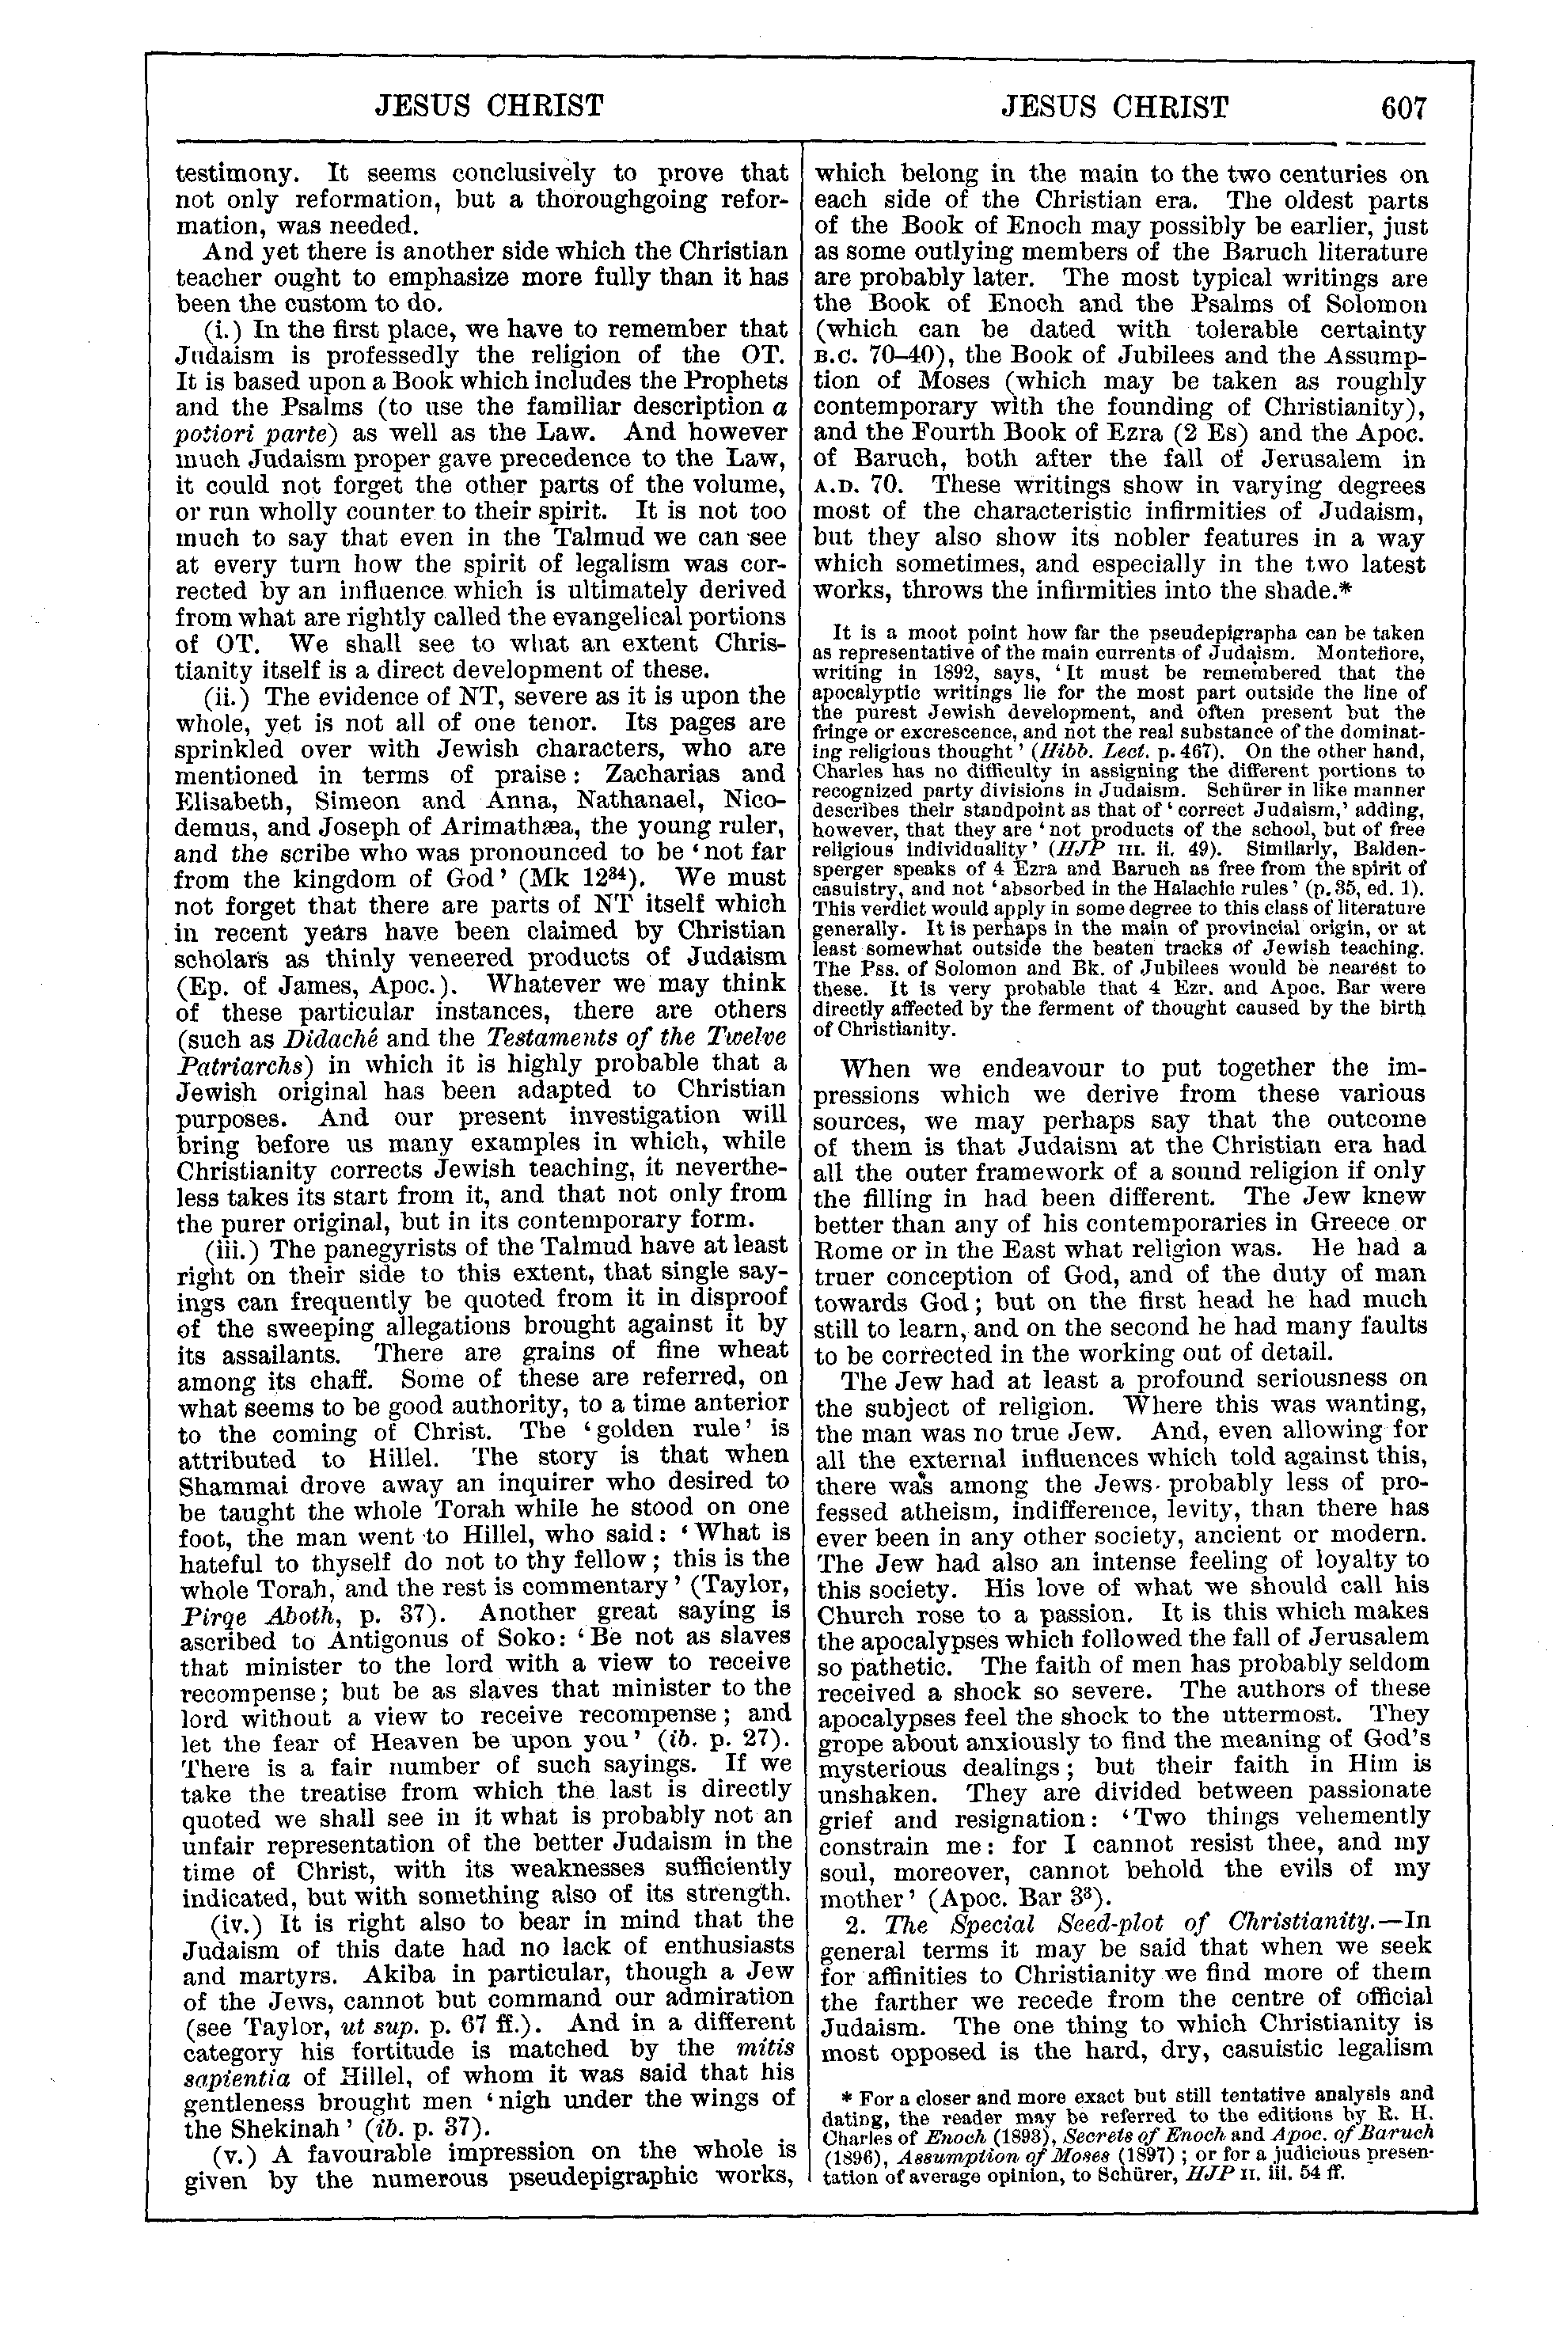 Image of page 607